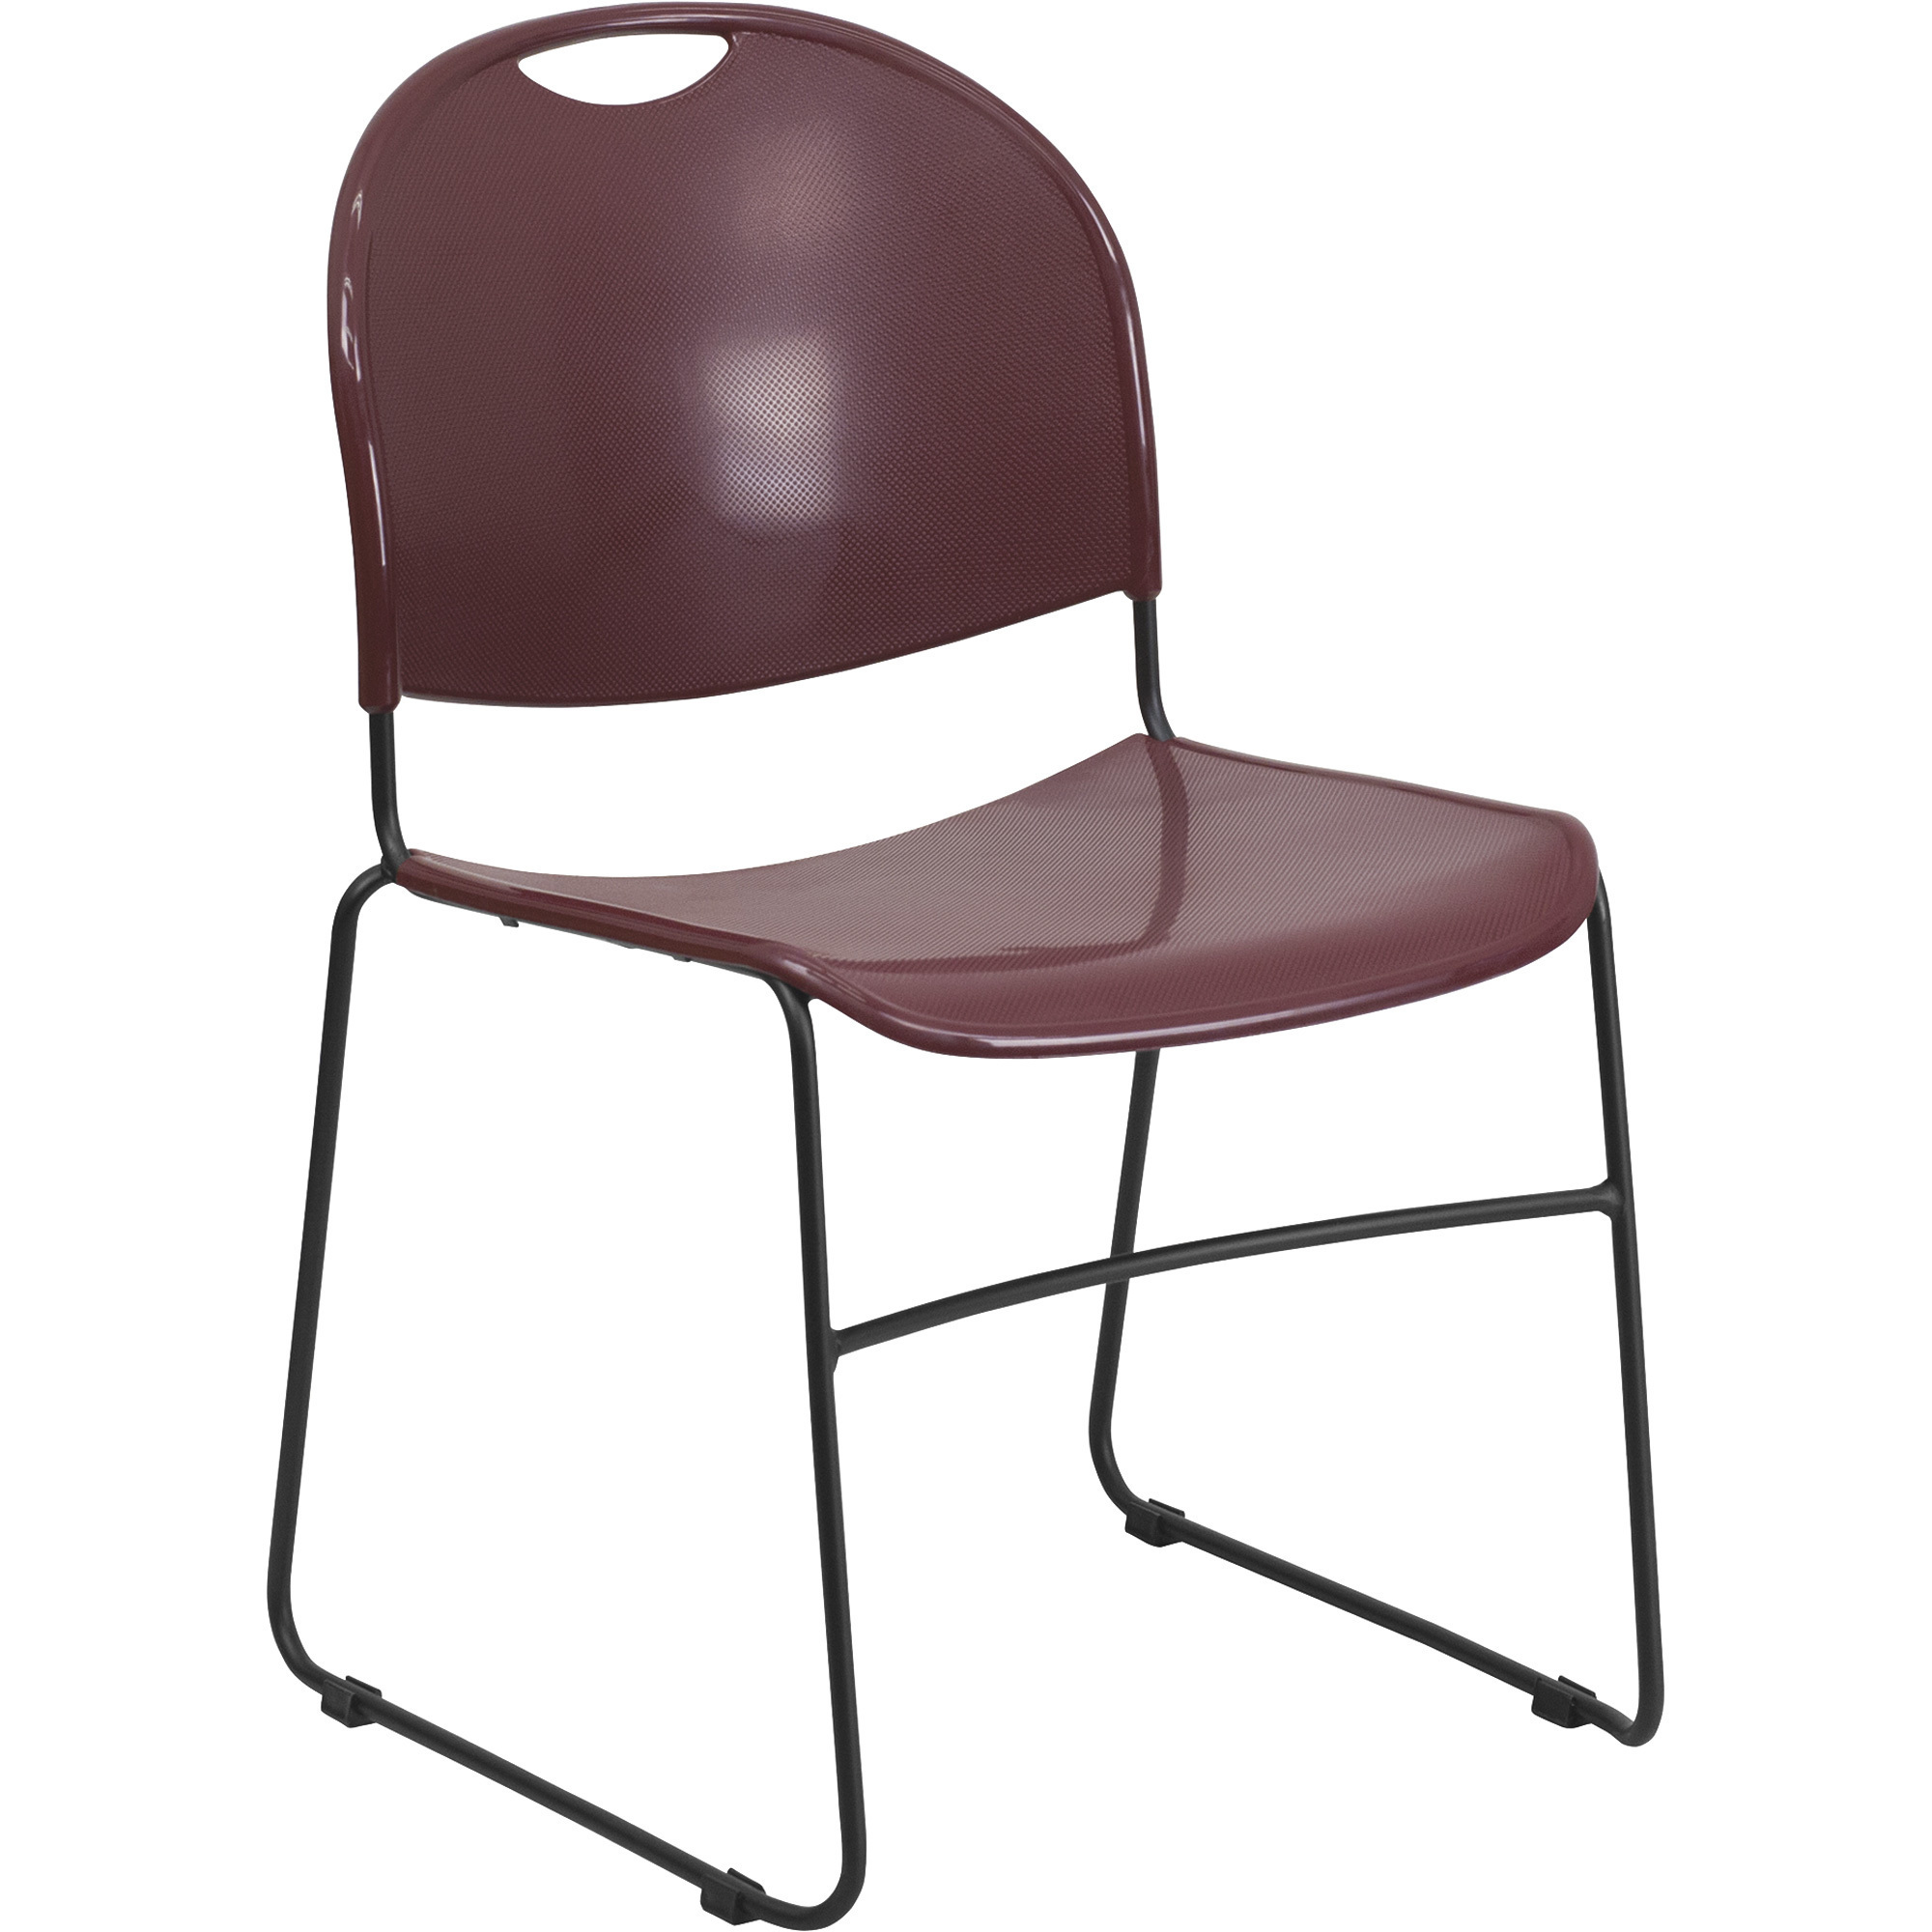 Flash Furniture Plastic Stack Chair with Sled Base â Burgundy w/ Black Frame, 19 1/2Inch W x 20 3/4Inch D x 31Inch H, Model RUT188BY